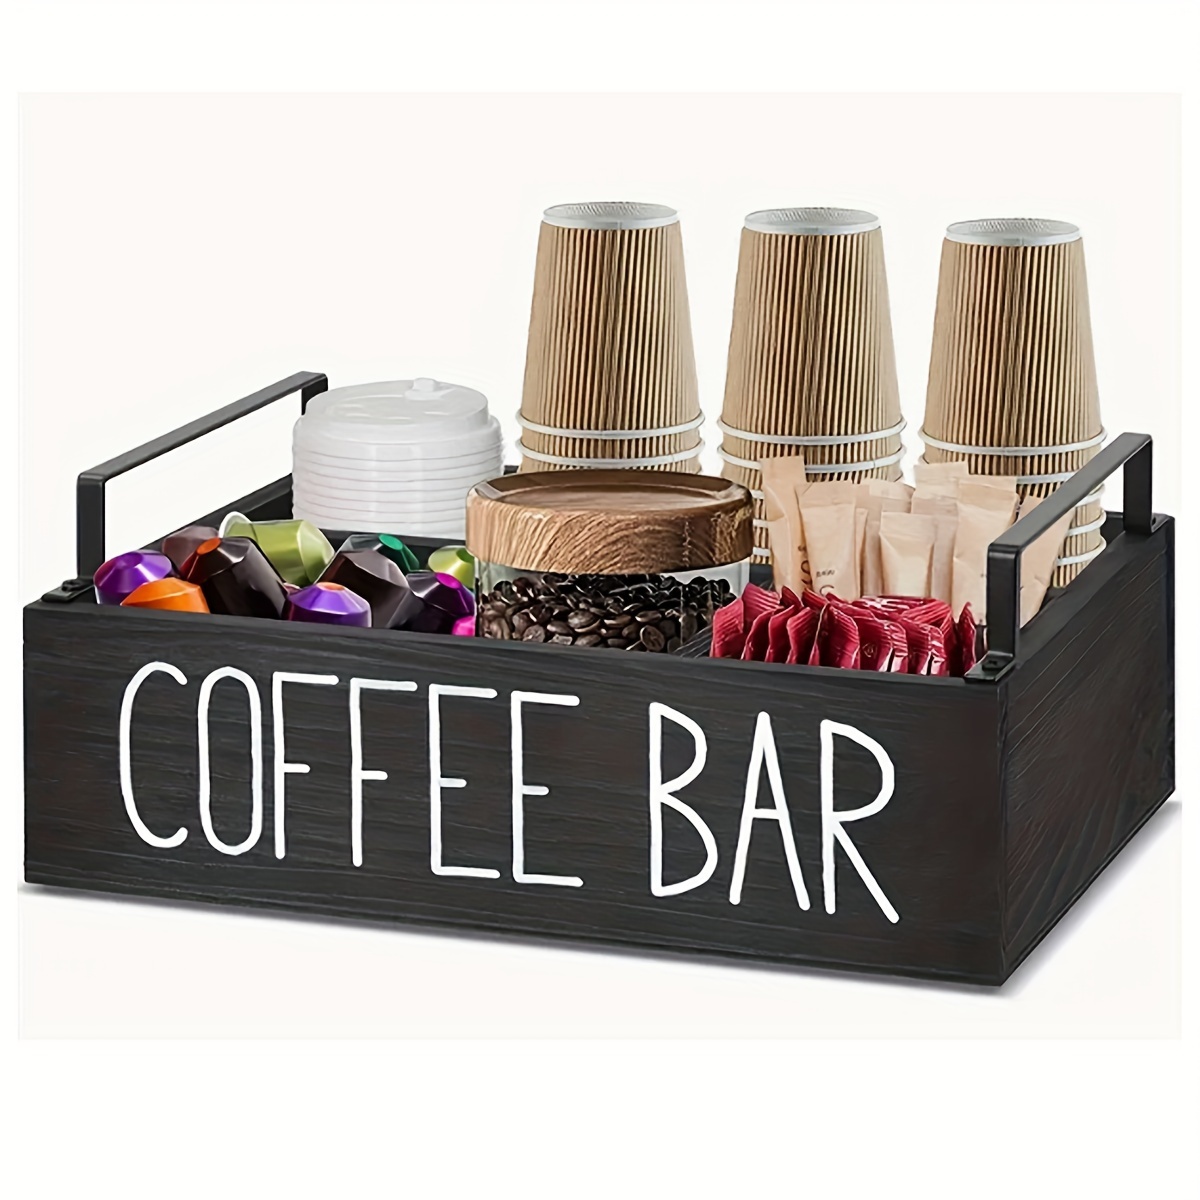 

1pc Rustic Wooden Coffee Bar Storage Box - Spacious Countertop Organizer For Tea & Coffee, Farmhouse Style Cup & Pod Holder, Enhances Home Decor, Perfect New Year Gift, Durable Home Storage Solution